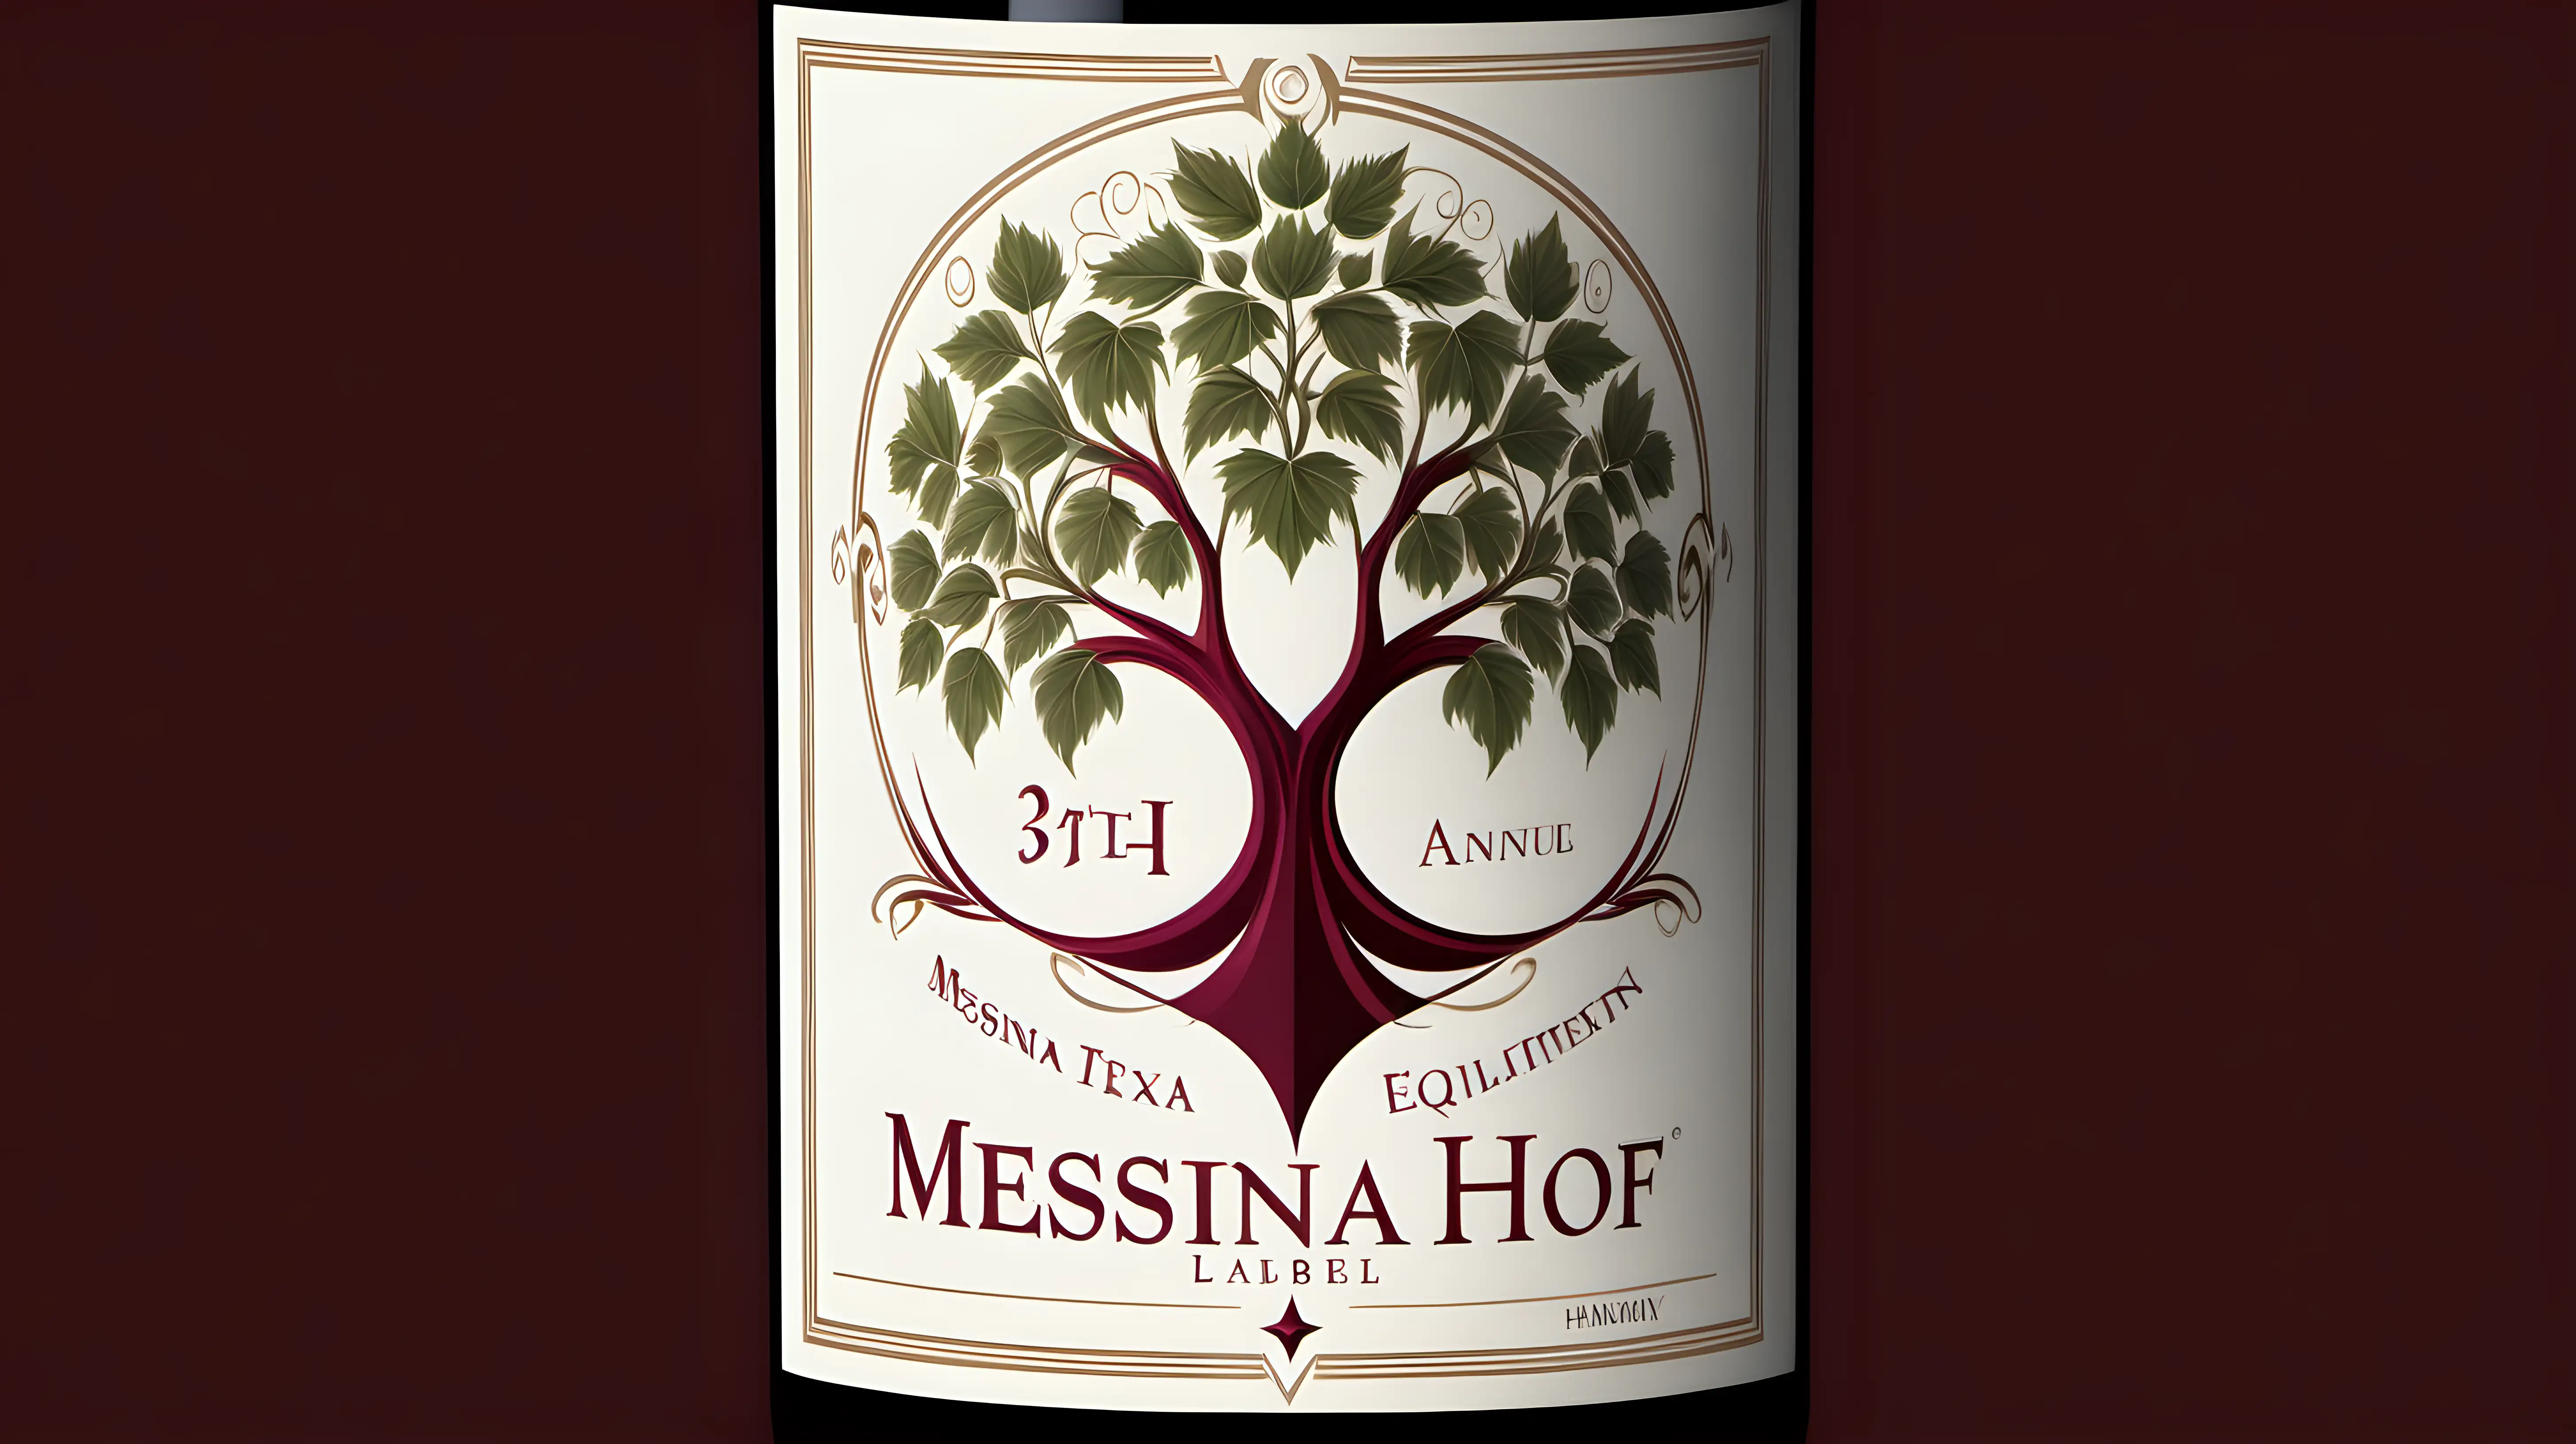 Symmetrical Harmony Celebrating the 34th Annual Messina Hof Texas Artist Wine Label Competition